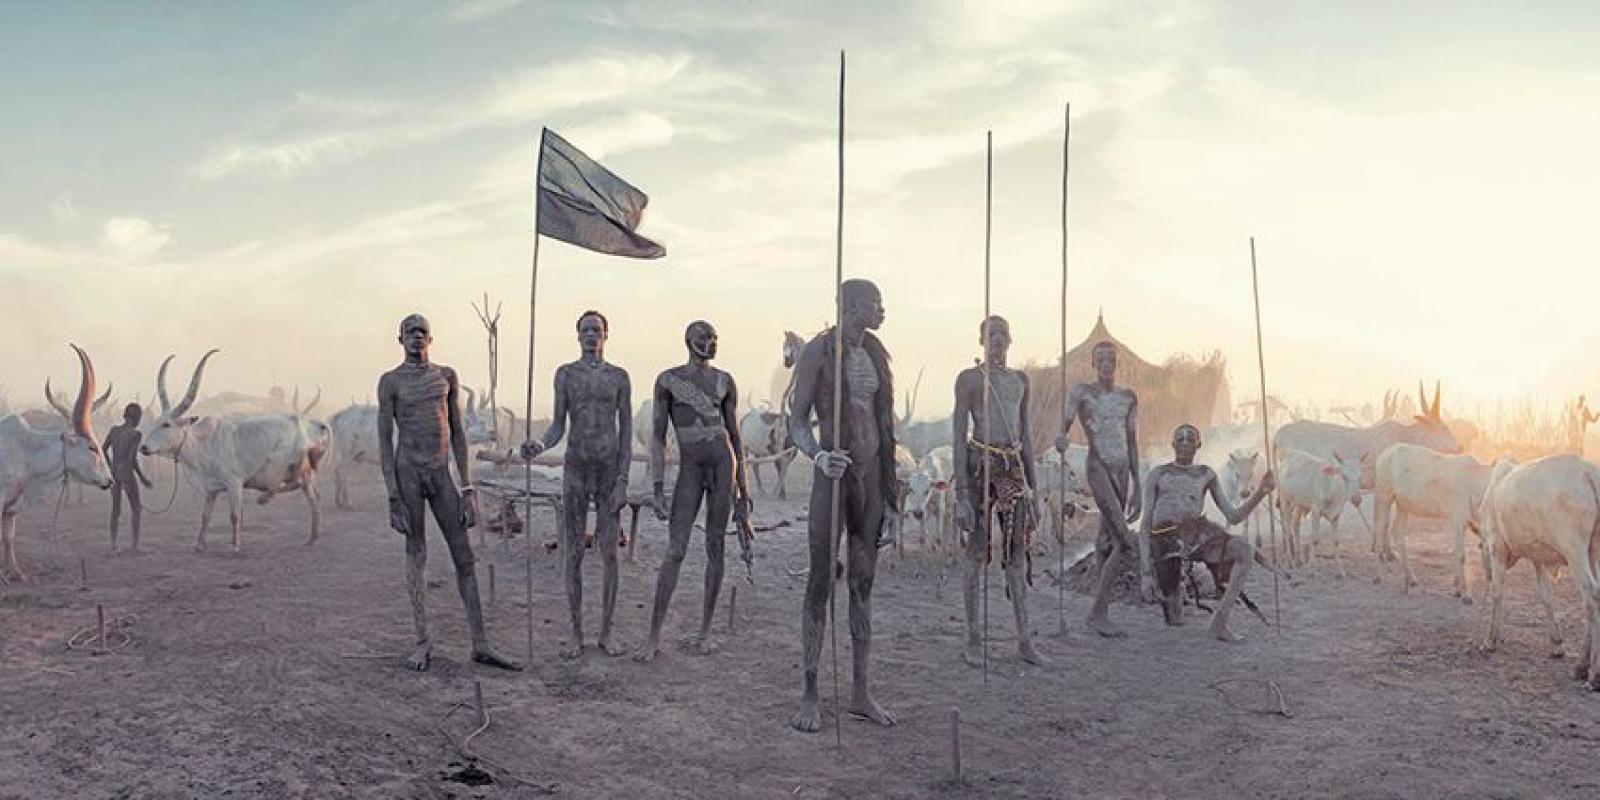 XXV 1 Sebit, Mundari, Mayong

South Sudan is the world’s youngest nation – it became independent in 2011, after Sudan was torn apart by violence. The legacy of these unstable years could almost make you forget the impressive beauty and diversity of